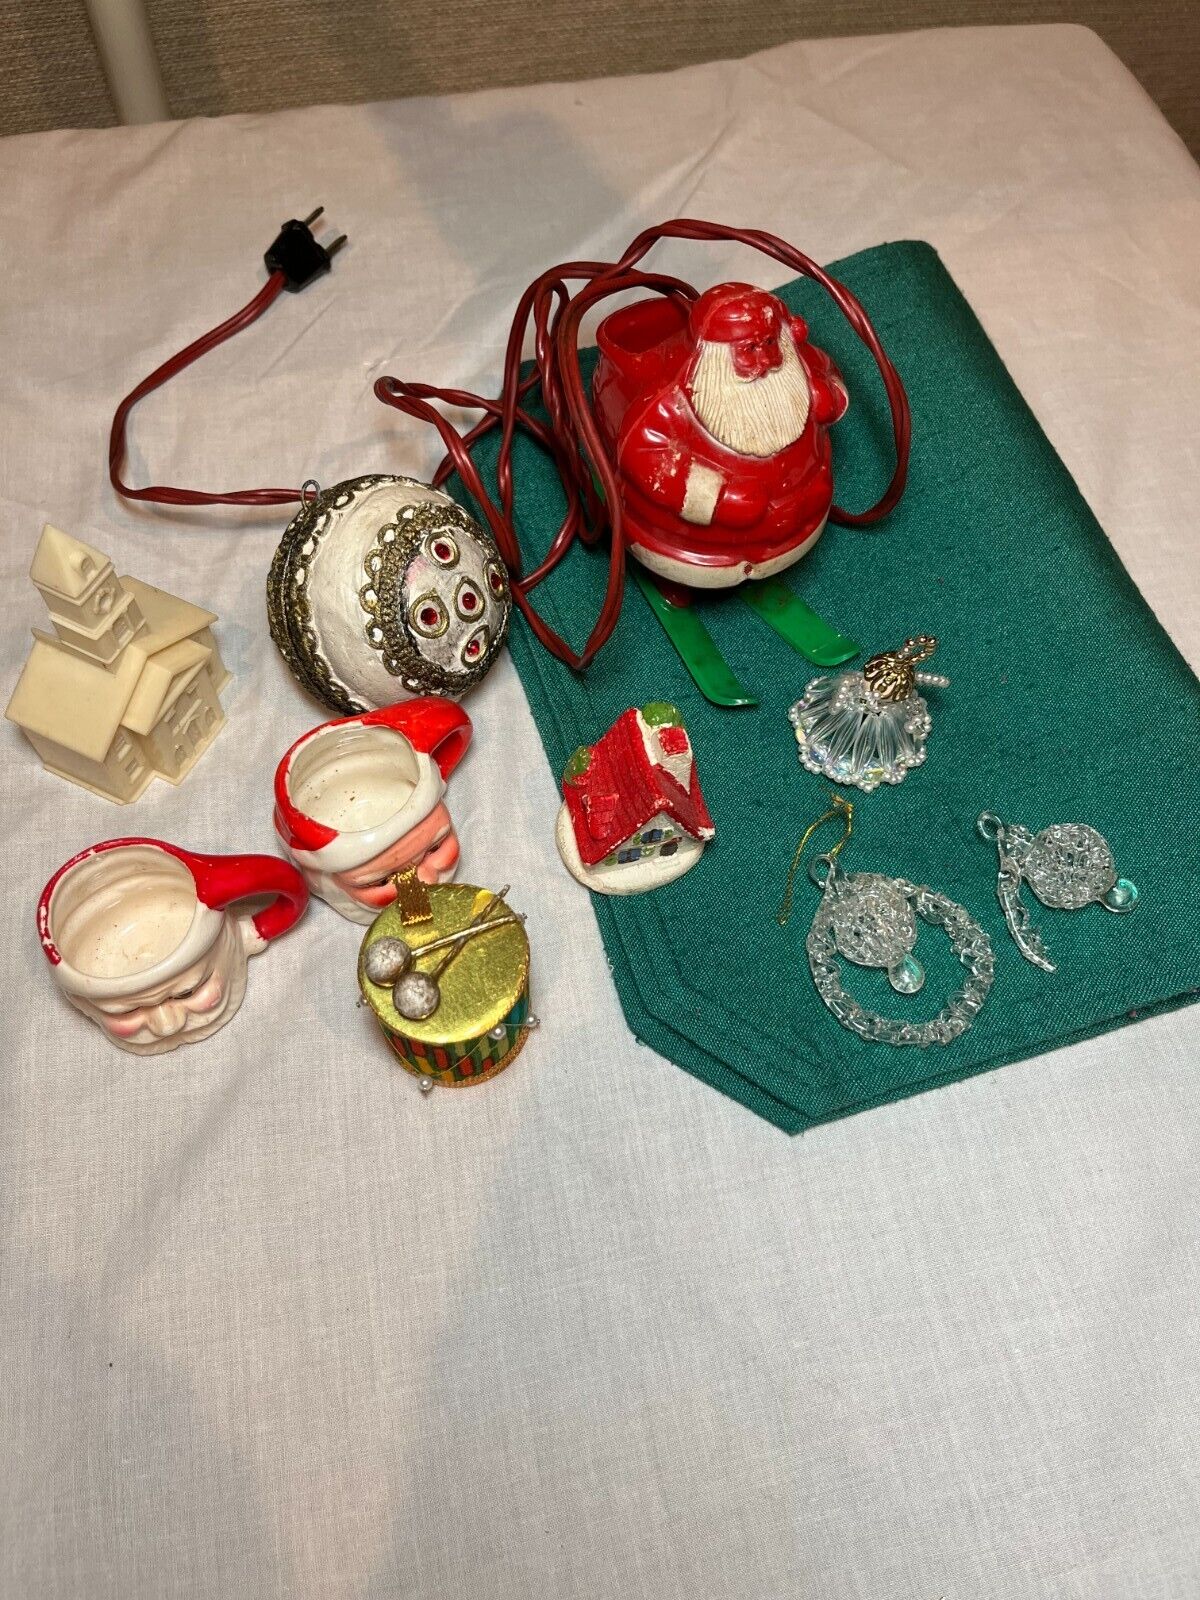 Lot of vintage Christmas decorations and tree ornaments(40s and 50s)